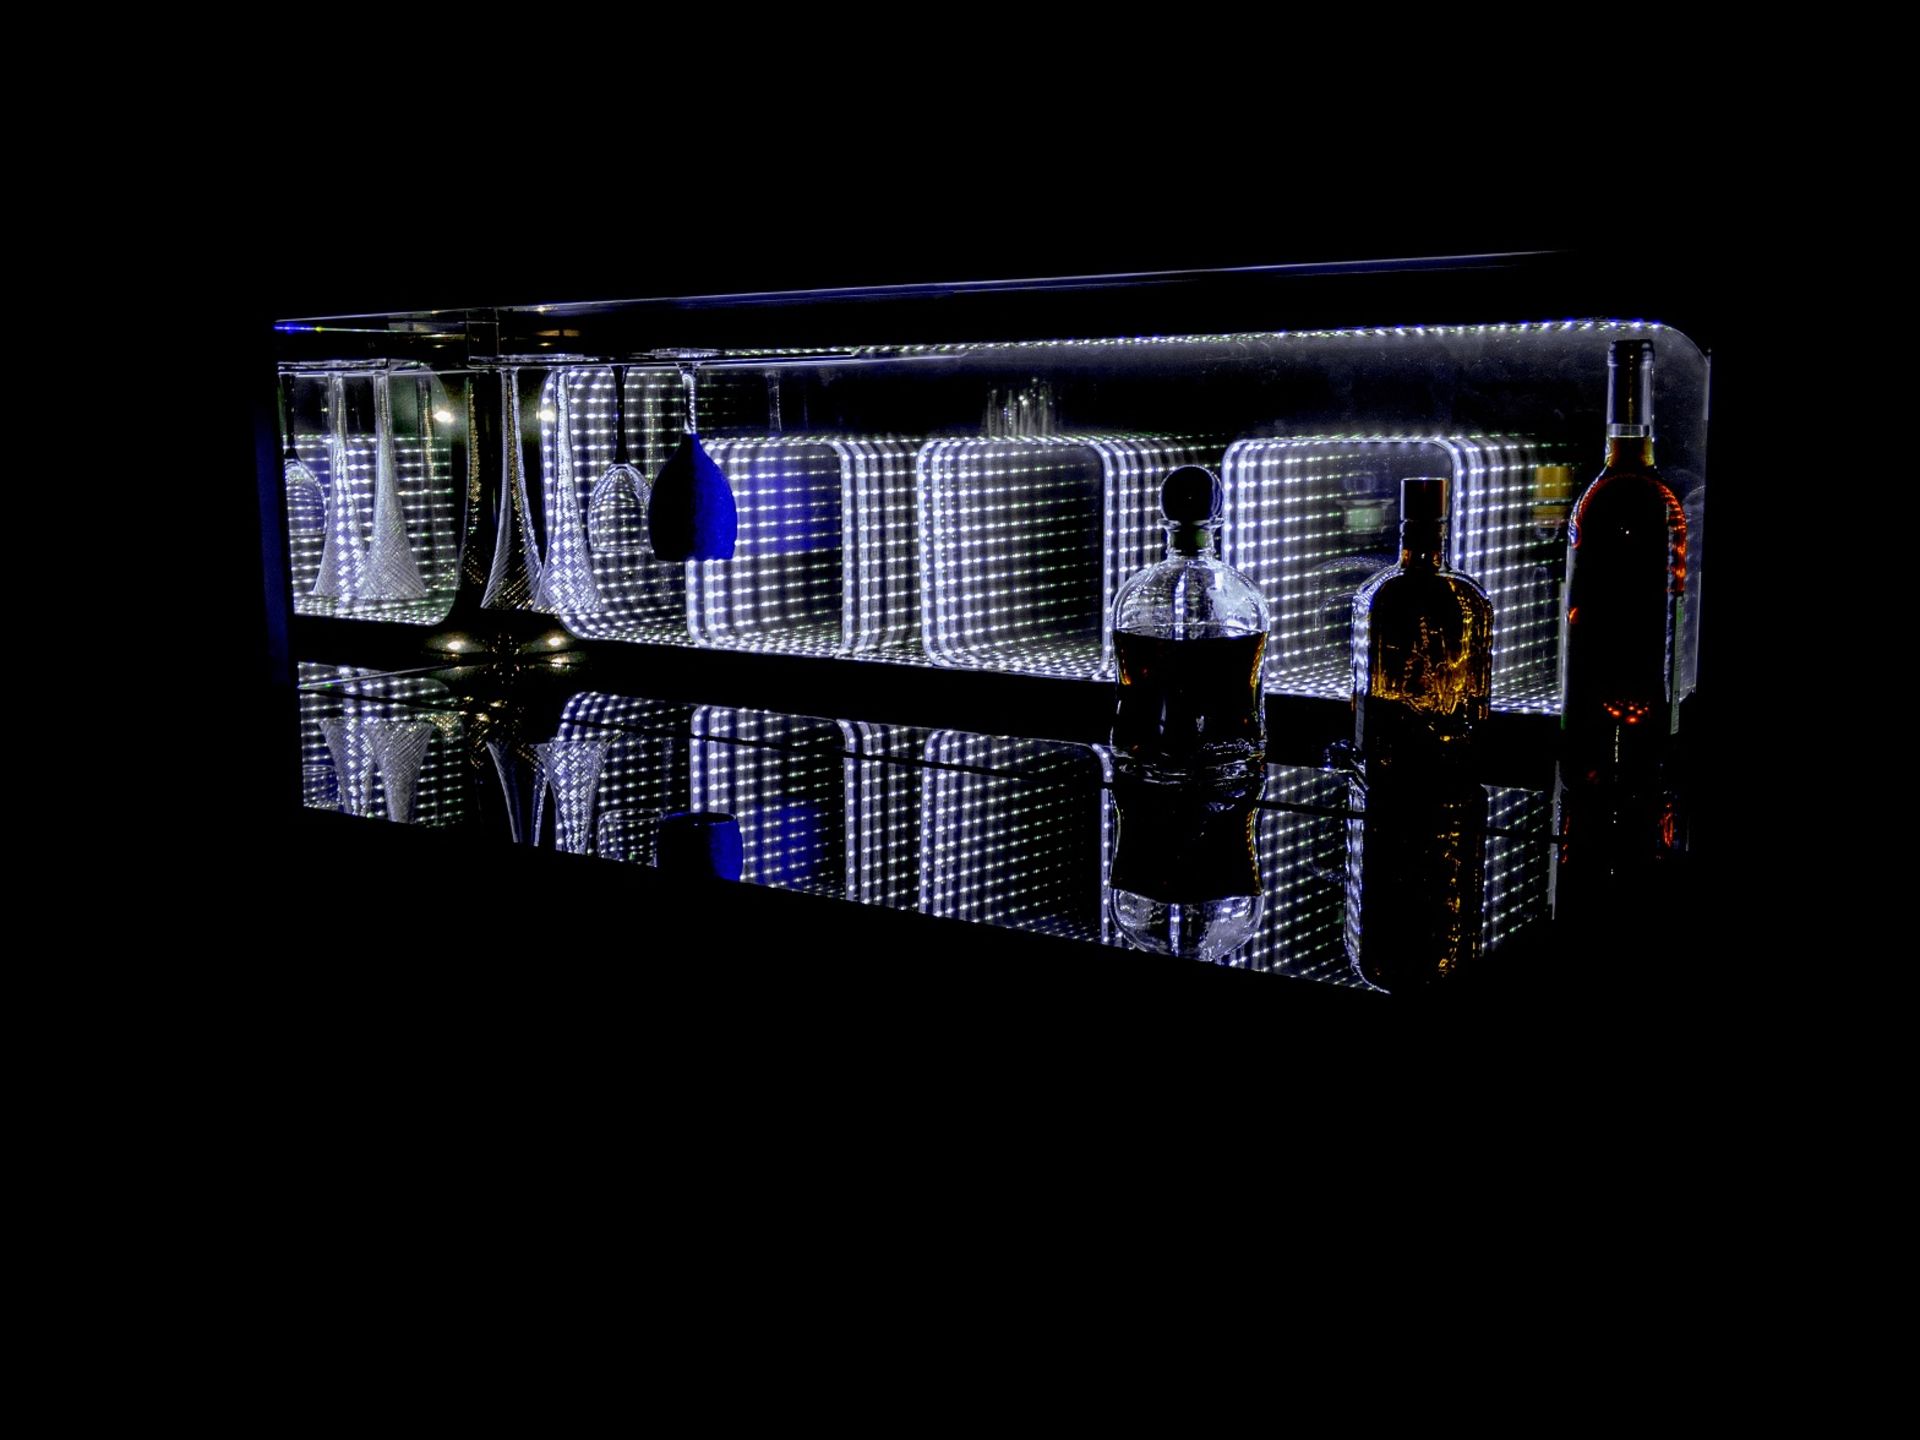 HIGH-QUALITY HAND MADE PIANO BAR, CAPACITY FOR 60 BOTTLES, PERFEC GIFT OR EXHIBITION PIECE *NO VAT* - Image 8 of 8